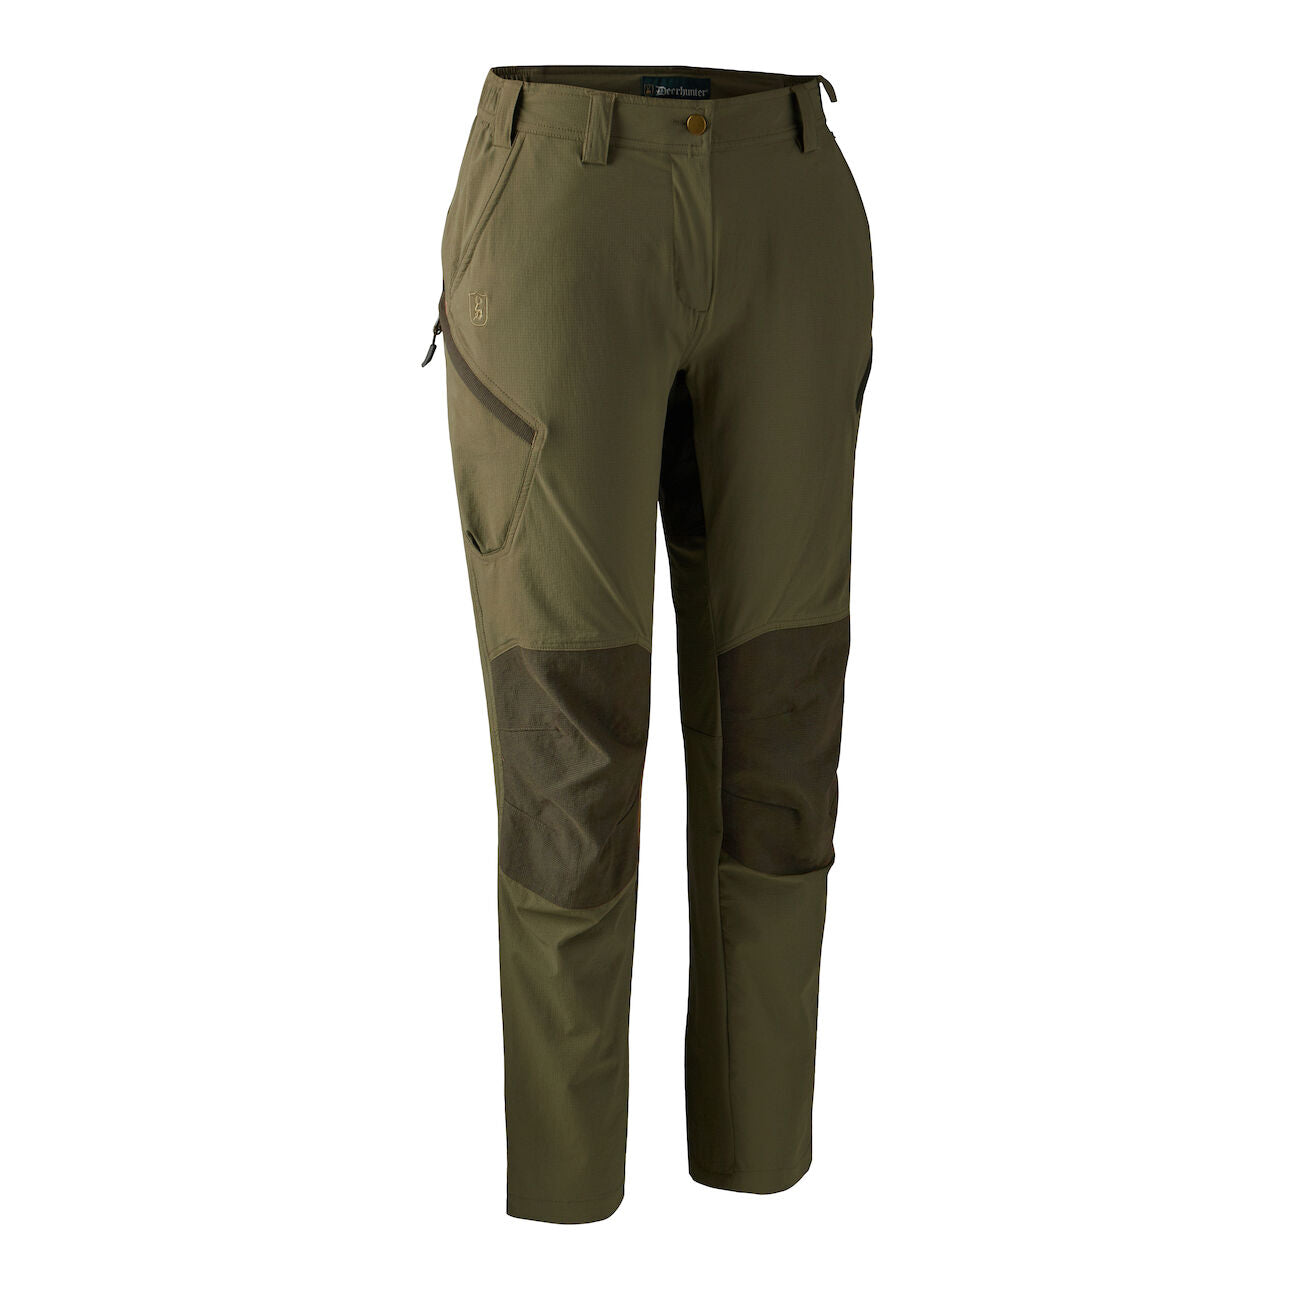 Lady Buena anti-insect broek